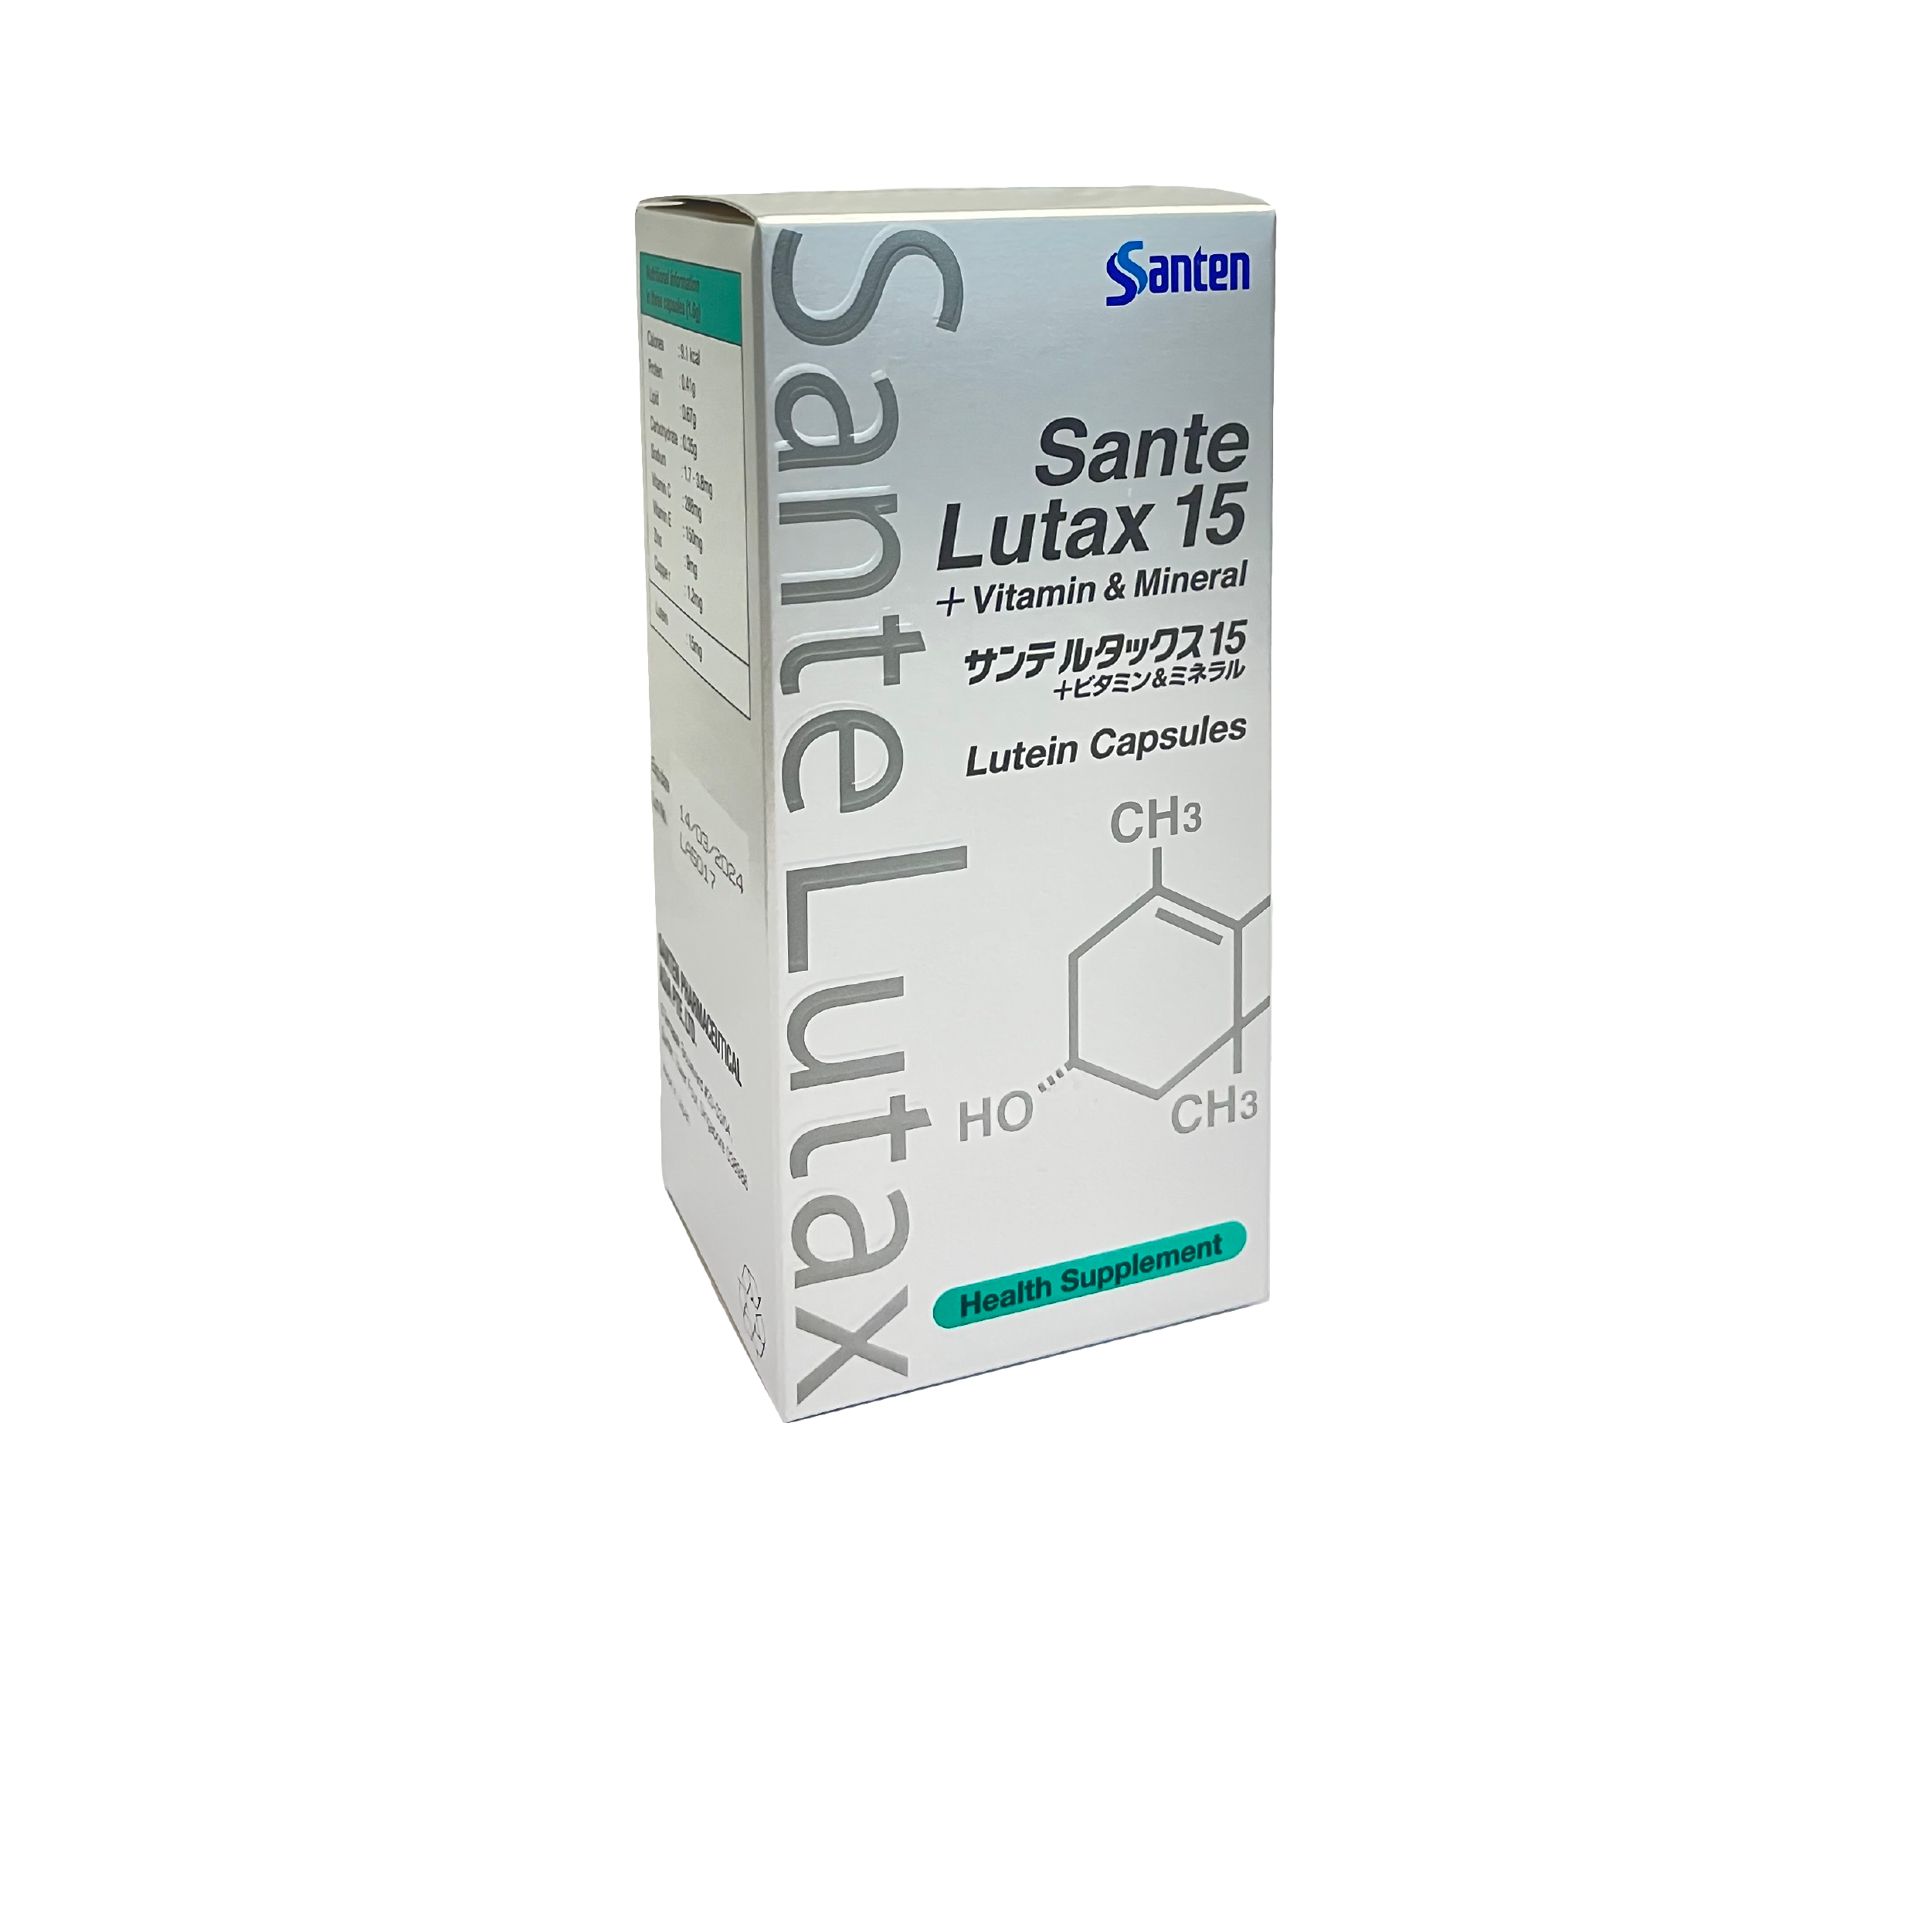 SanteLutax®I5 with Vitamins and Minerals